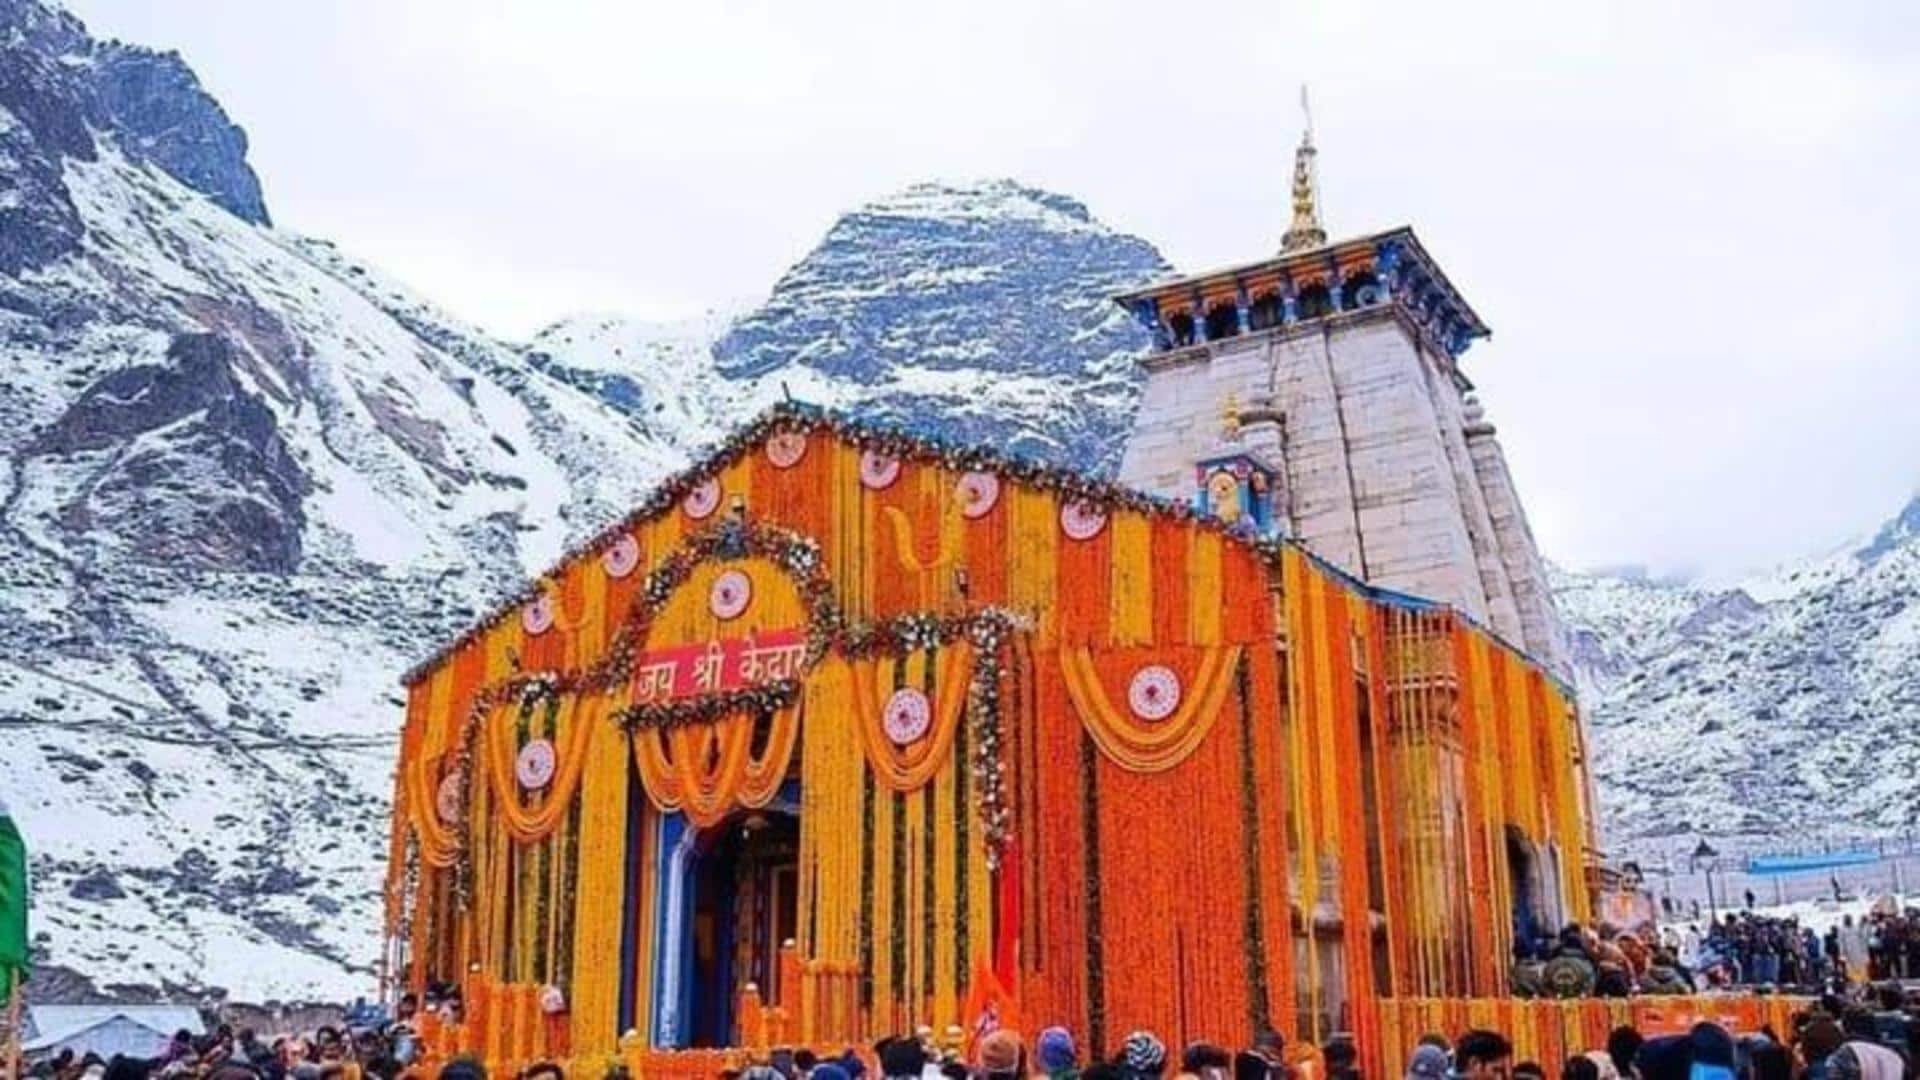 Kedarnath Temple bans photography, videography; violaters to face legal action